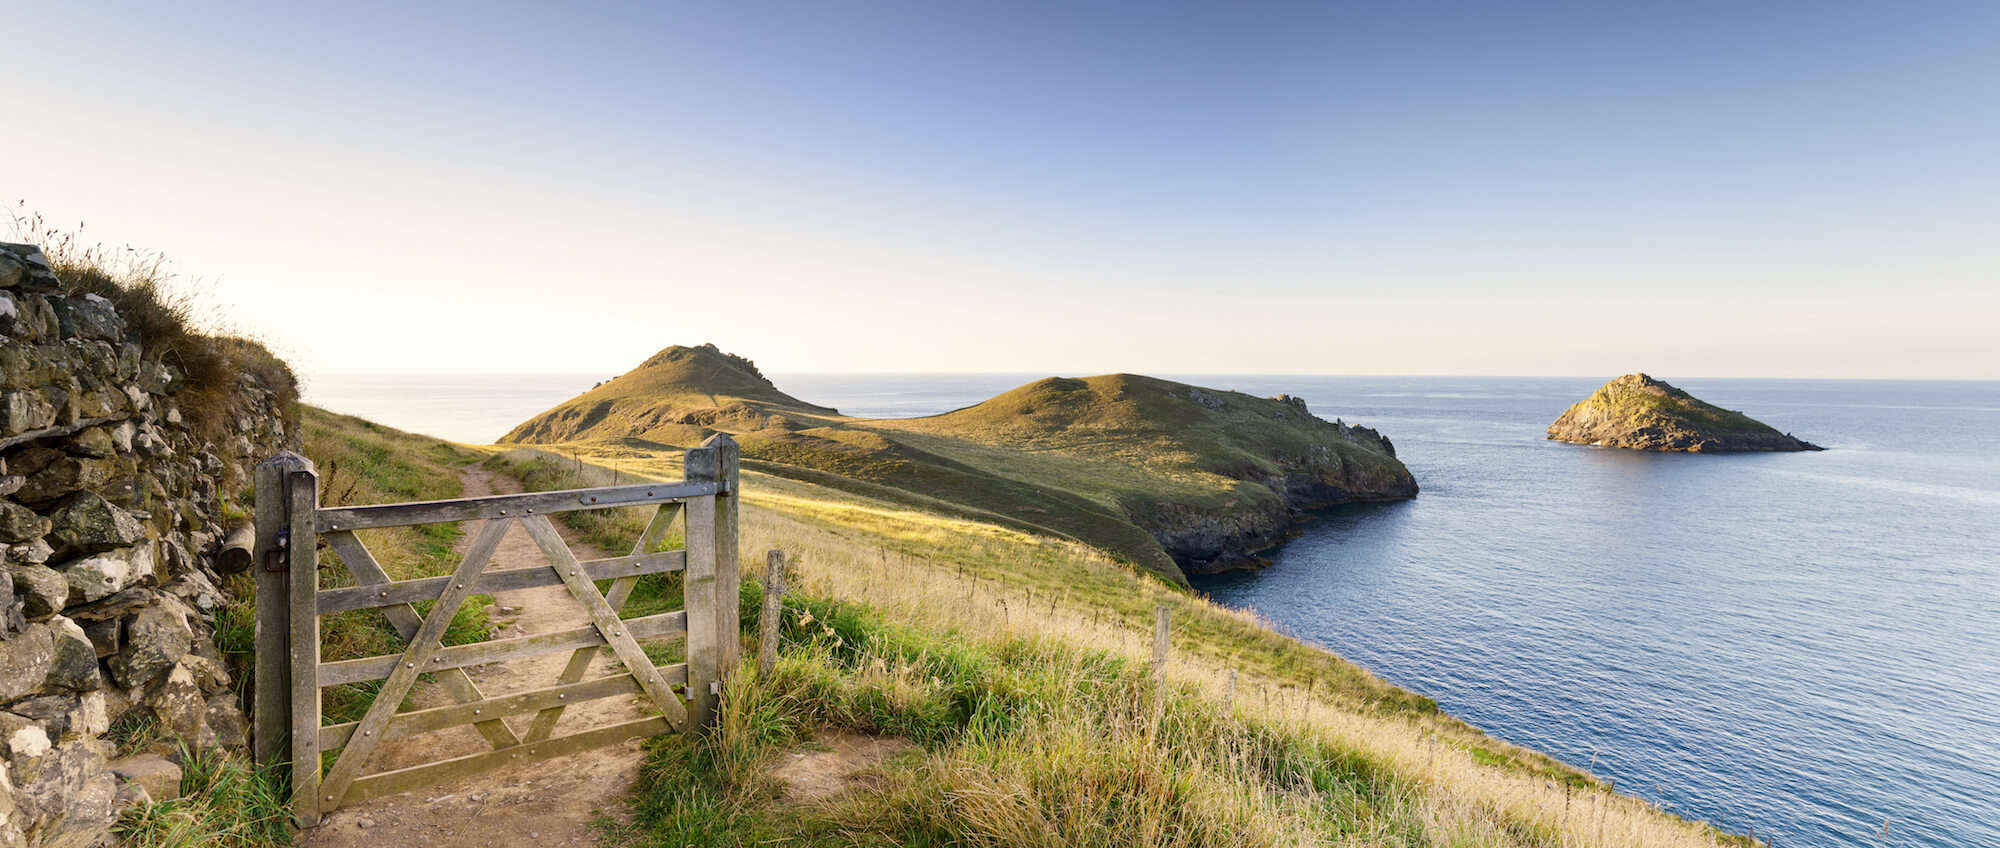 South West Coat Path - Walking Holidays Choose Your Walk